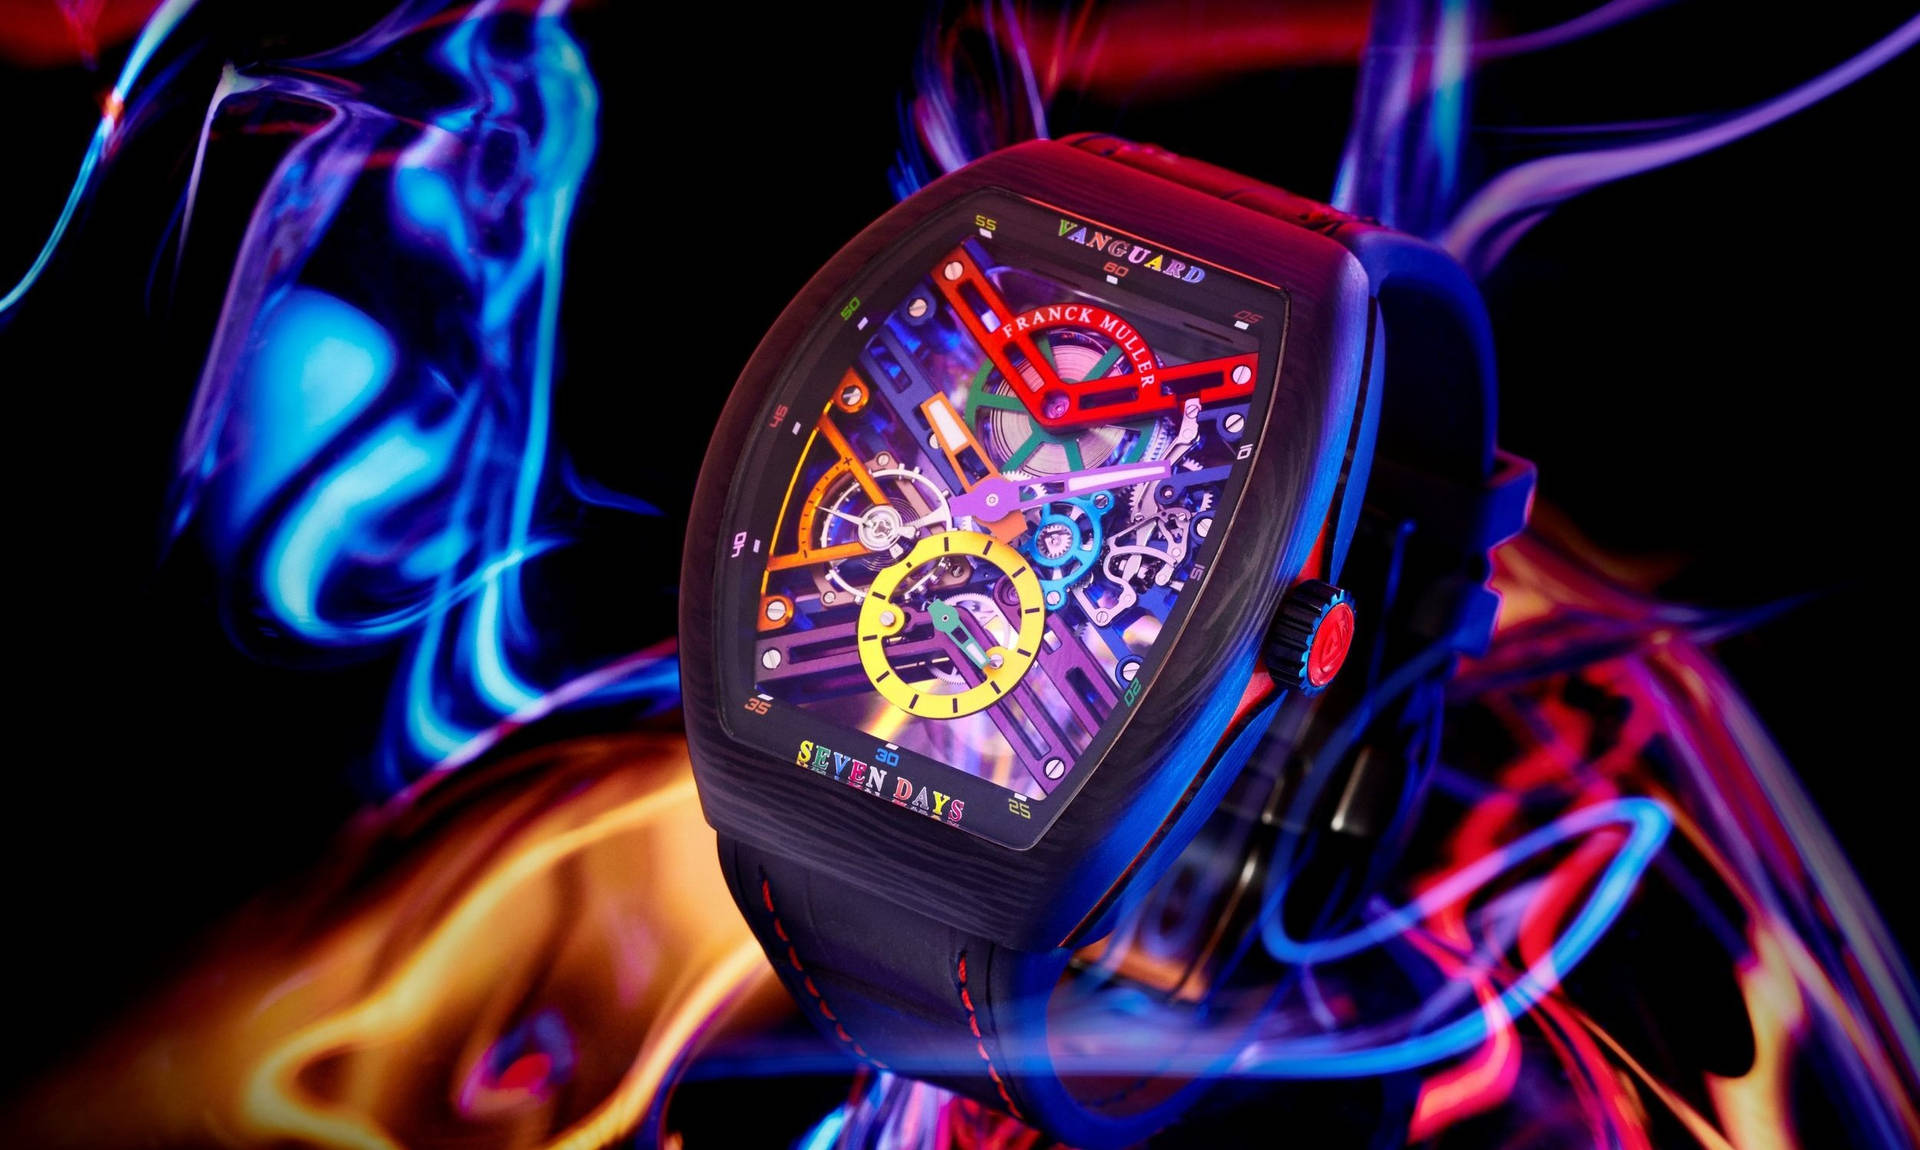 The Vibrant and Luxurious Franck Muller Color Dreams Timepiece Wallpaper